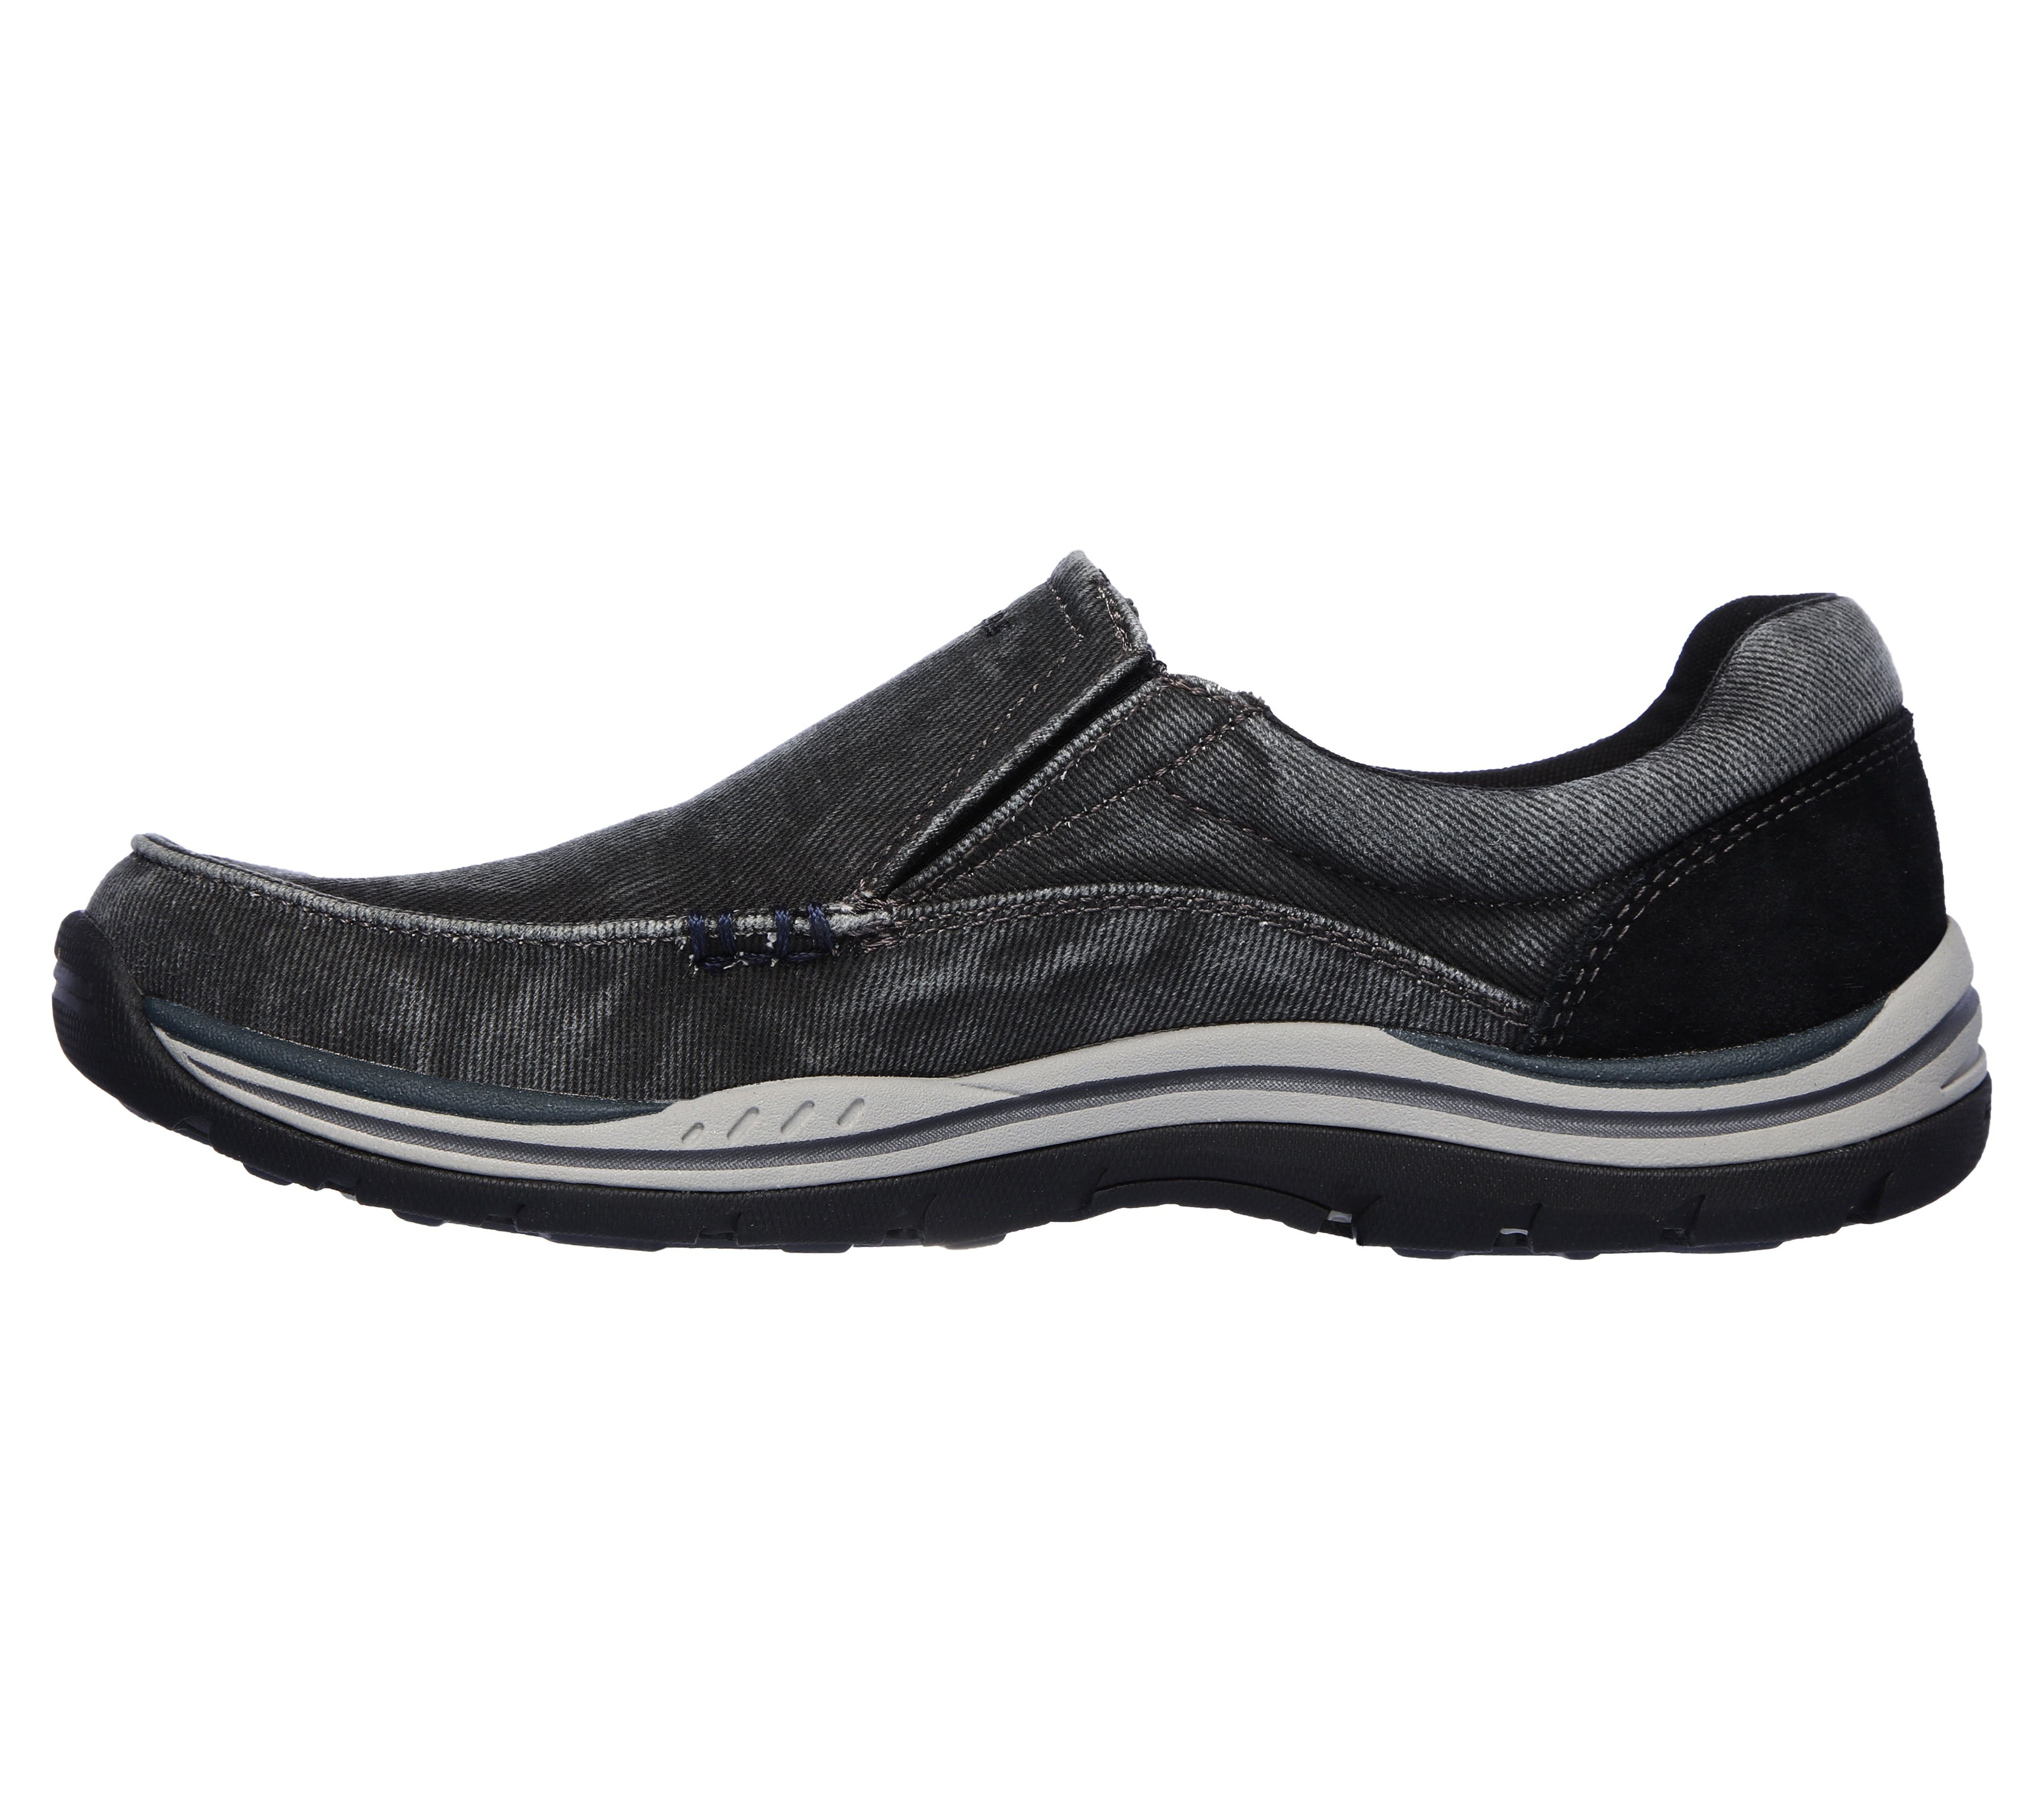 Skechers Men's Relaxed Fit Expected Avillo Casual Slip-on Shoe (Wide Width Available) - image 2 of 7